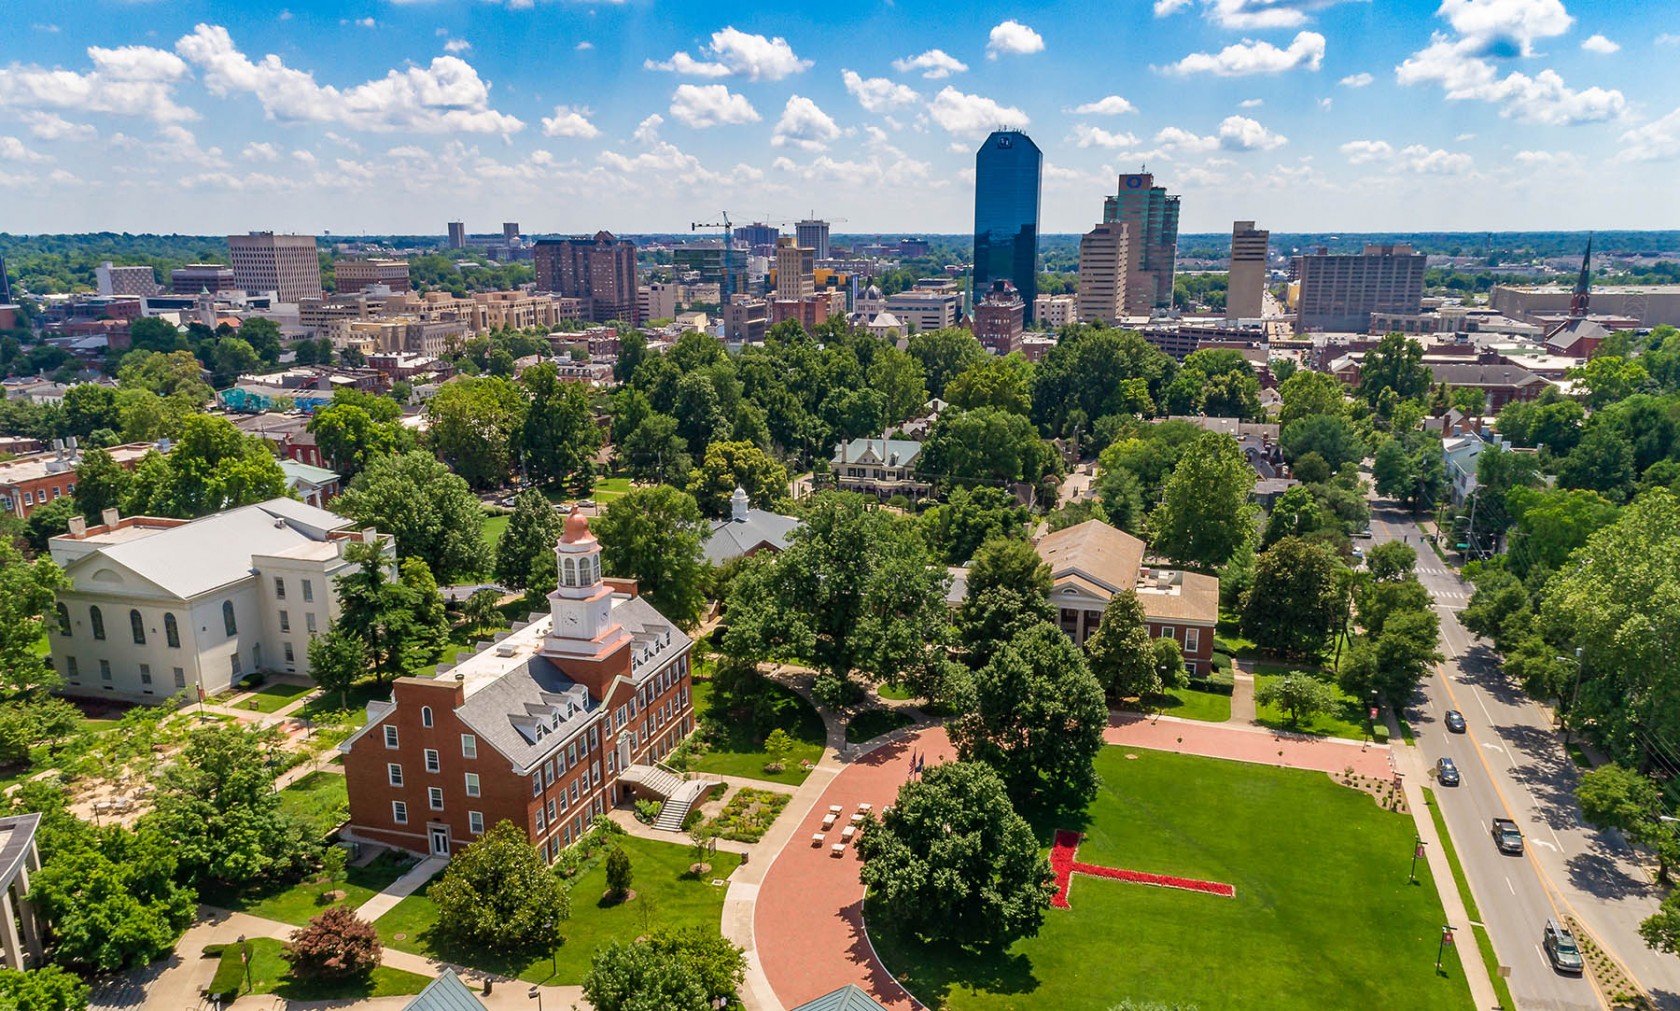 Transylvania University Class of 2023 to campus for 201920